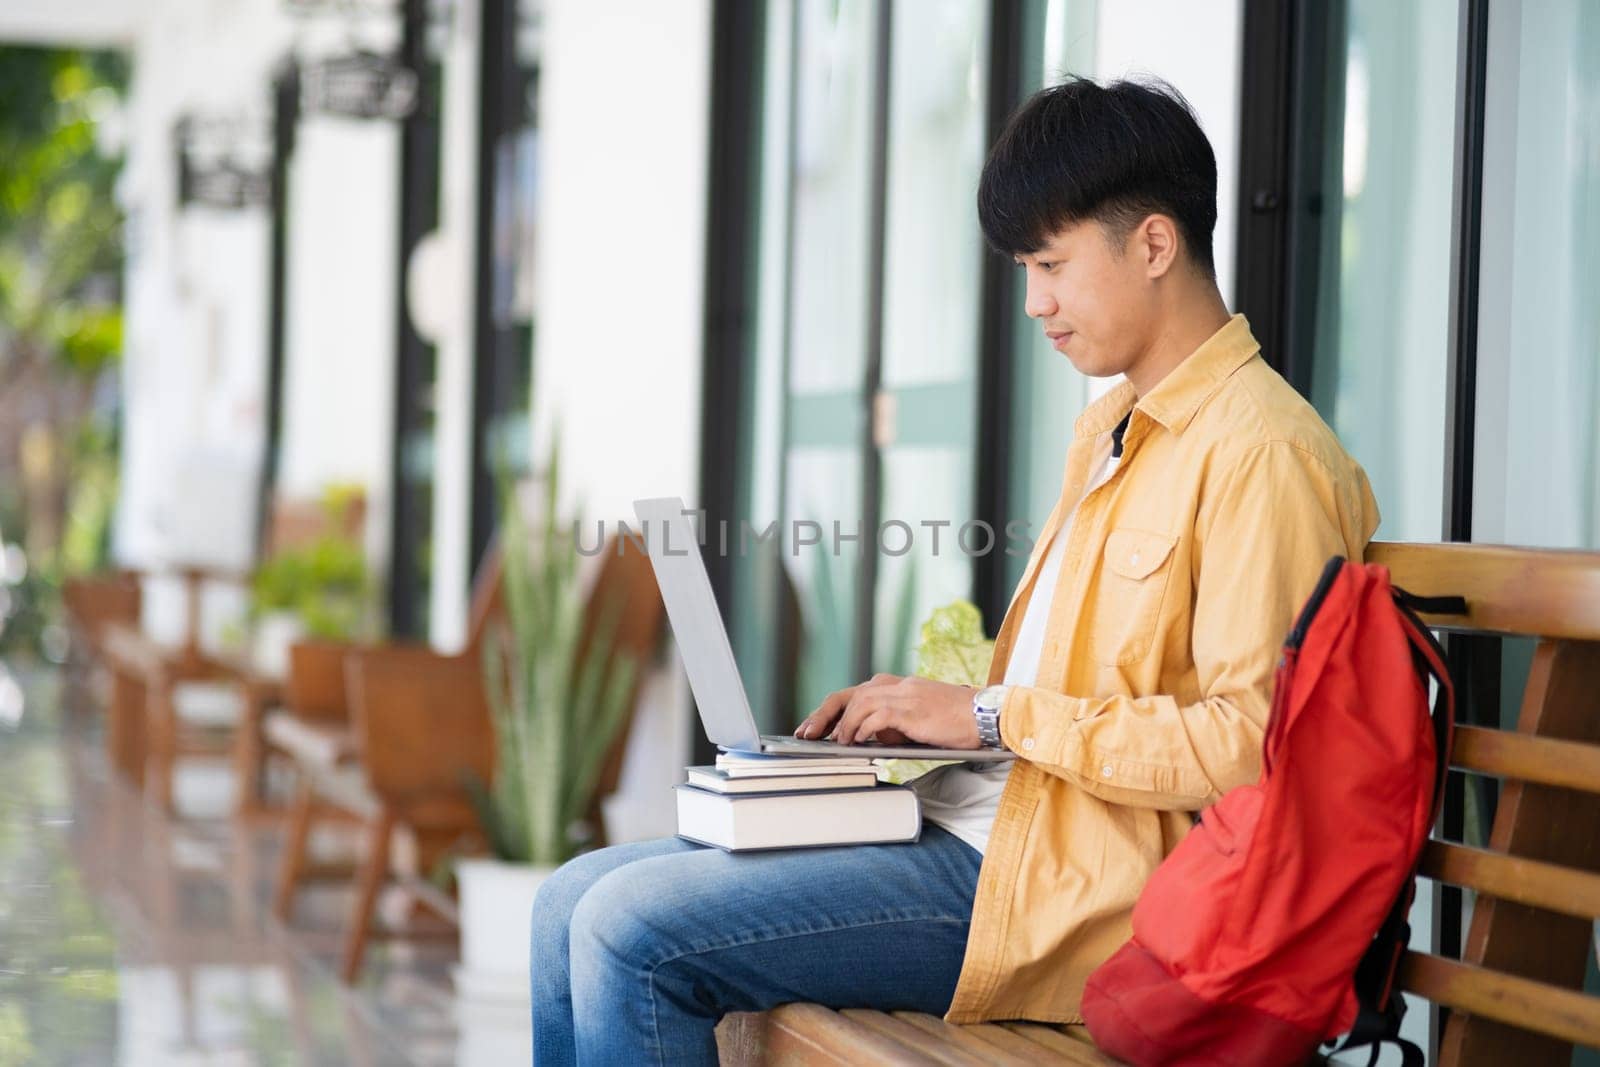 College Student Studying with Laptop on Outdoor Campus Bench by ijeab